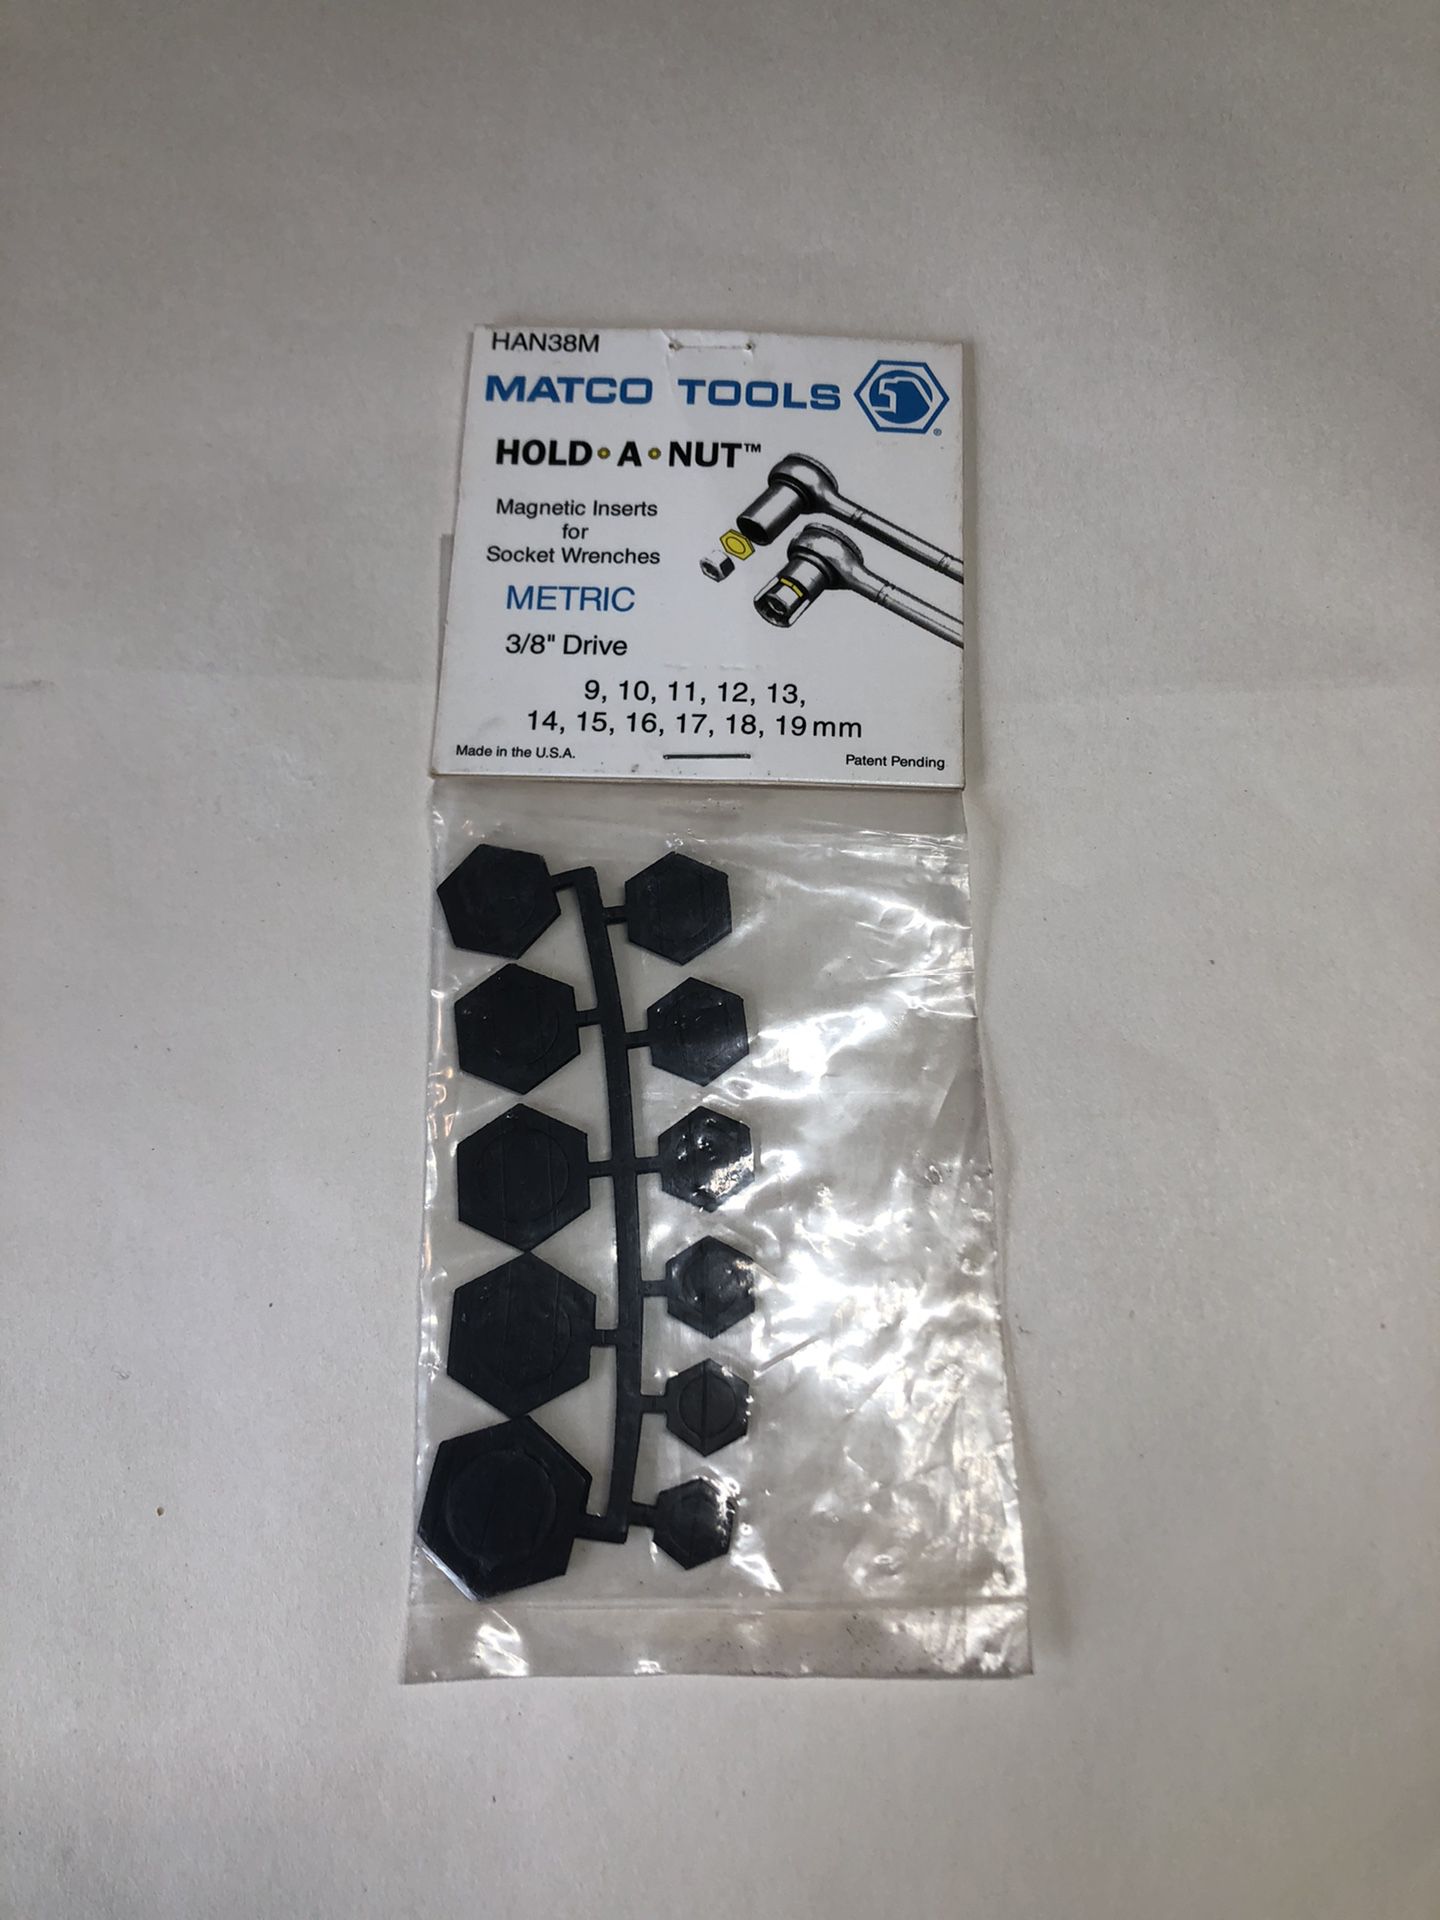 Matco tools hold a nut magnetic inserts